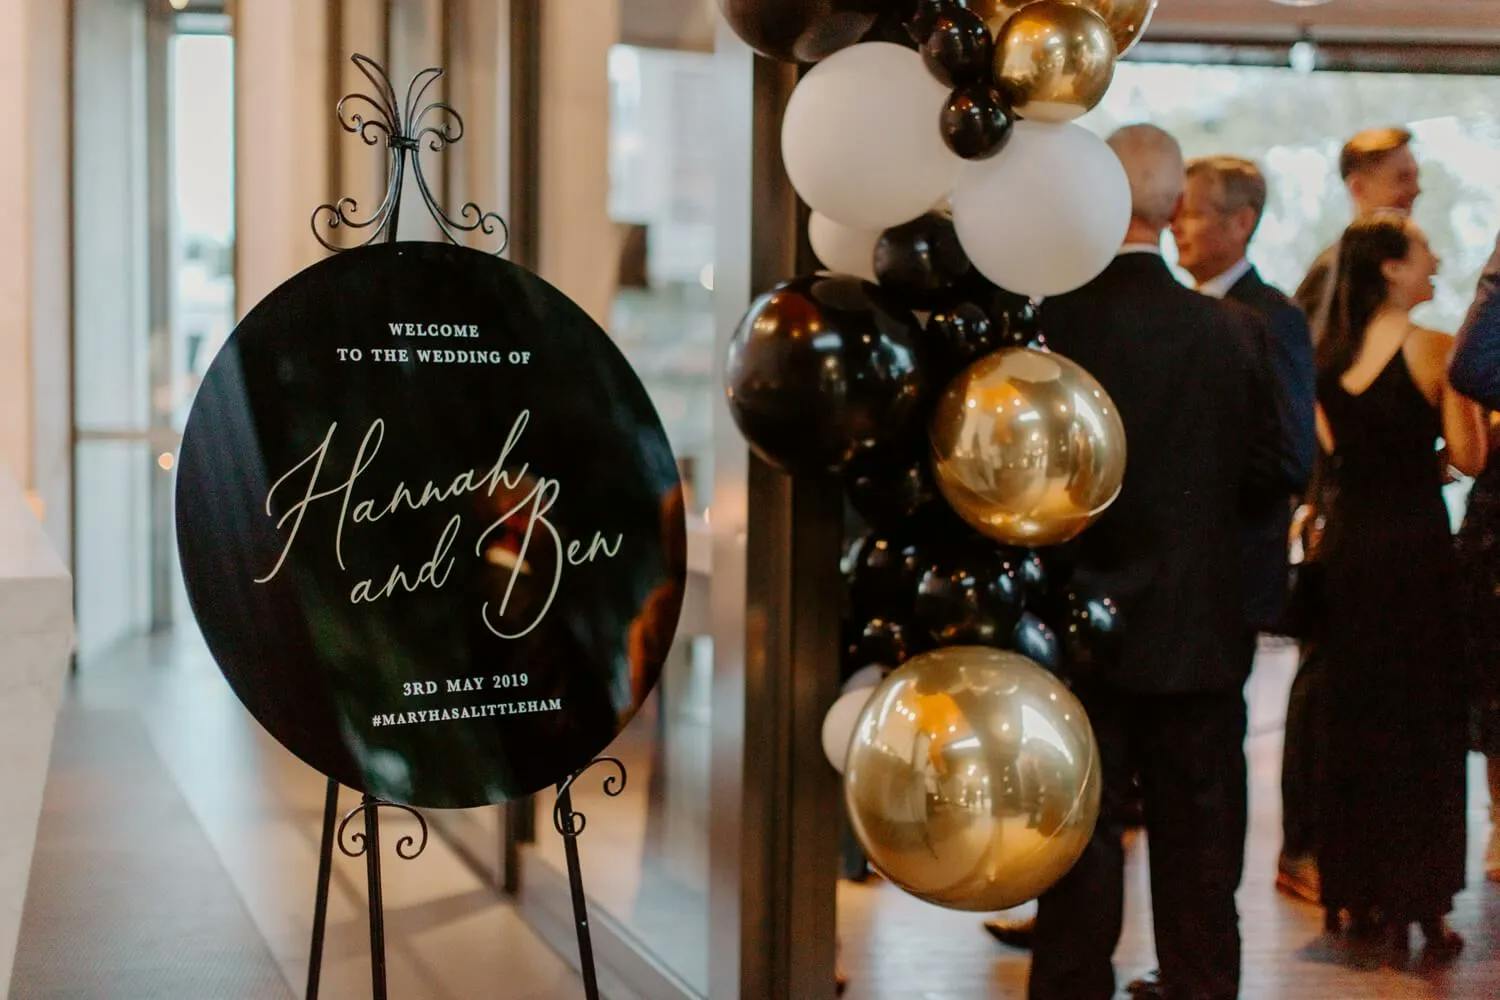 An elegant wedding display featuring a black circular welcome sign with white cursive text that reads "Welcome to the wedding of Hannah and Ben" and a date. Black, white, and gold balloons are arranged next to the sign. Guests in formal attire mill around in the background.